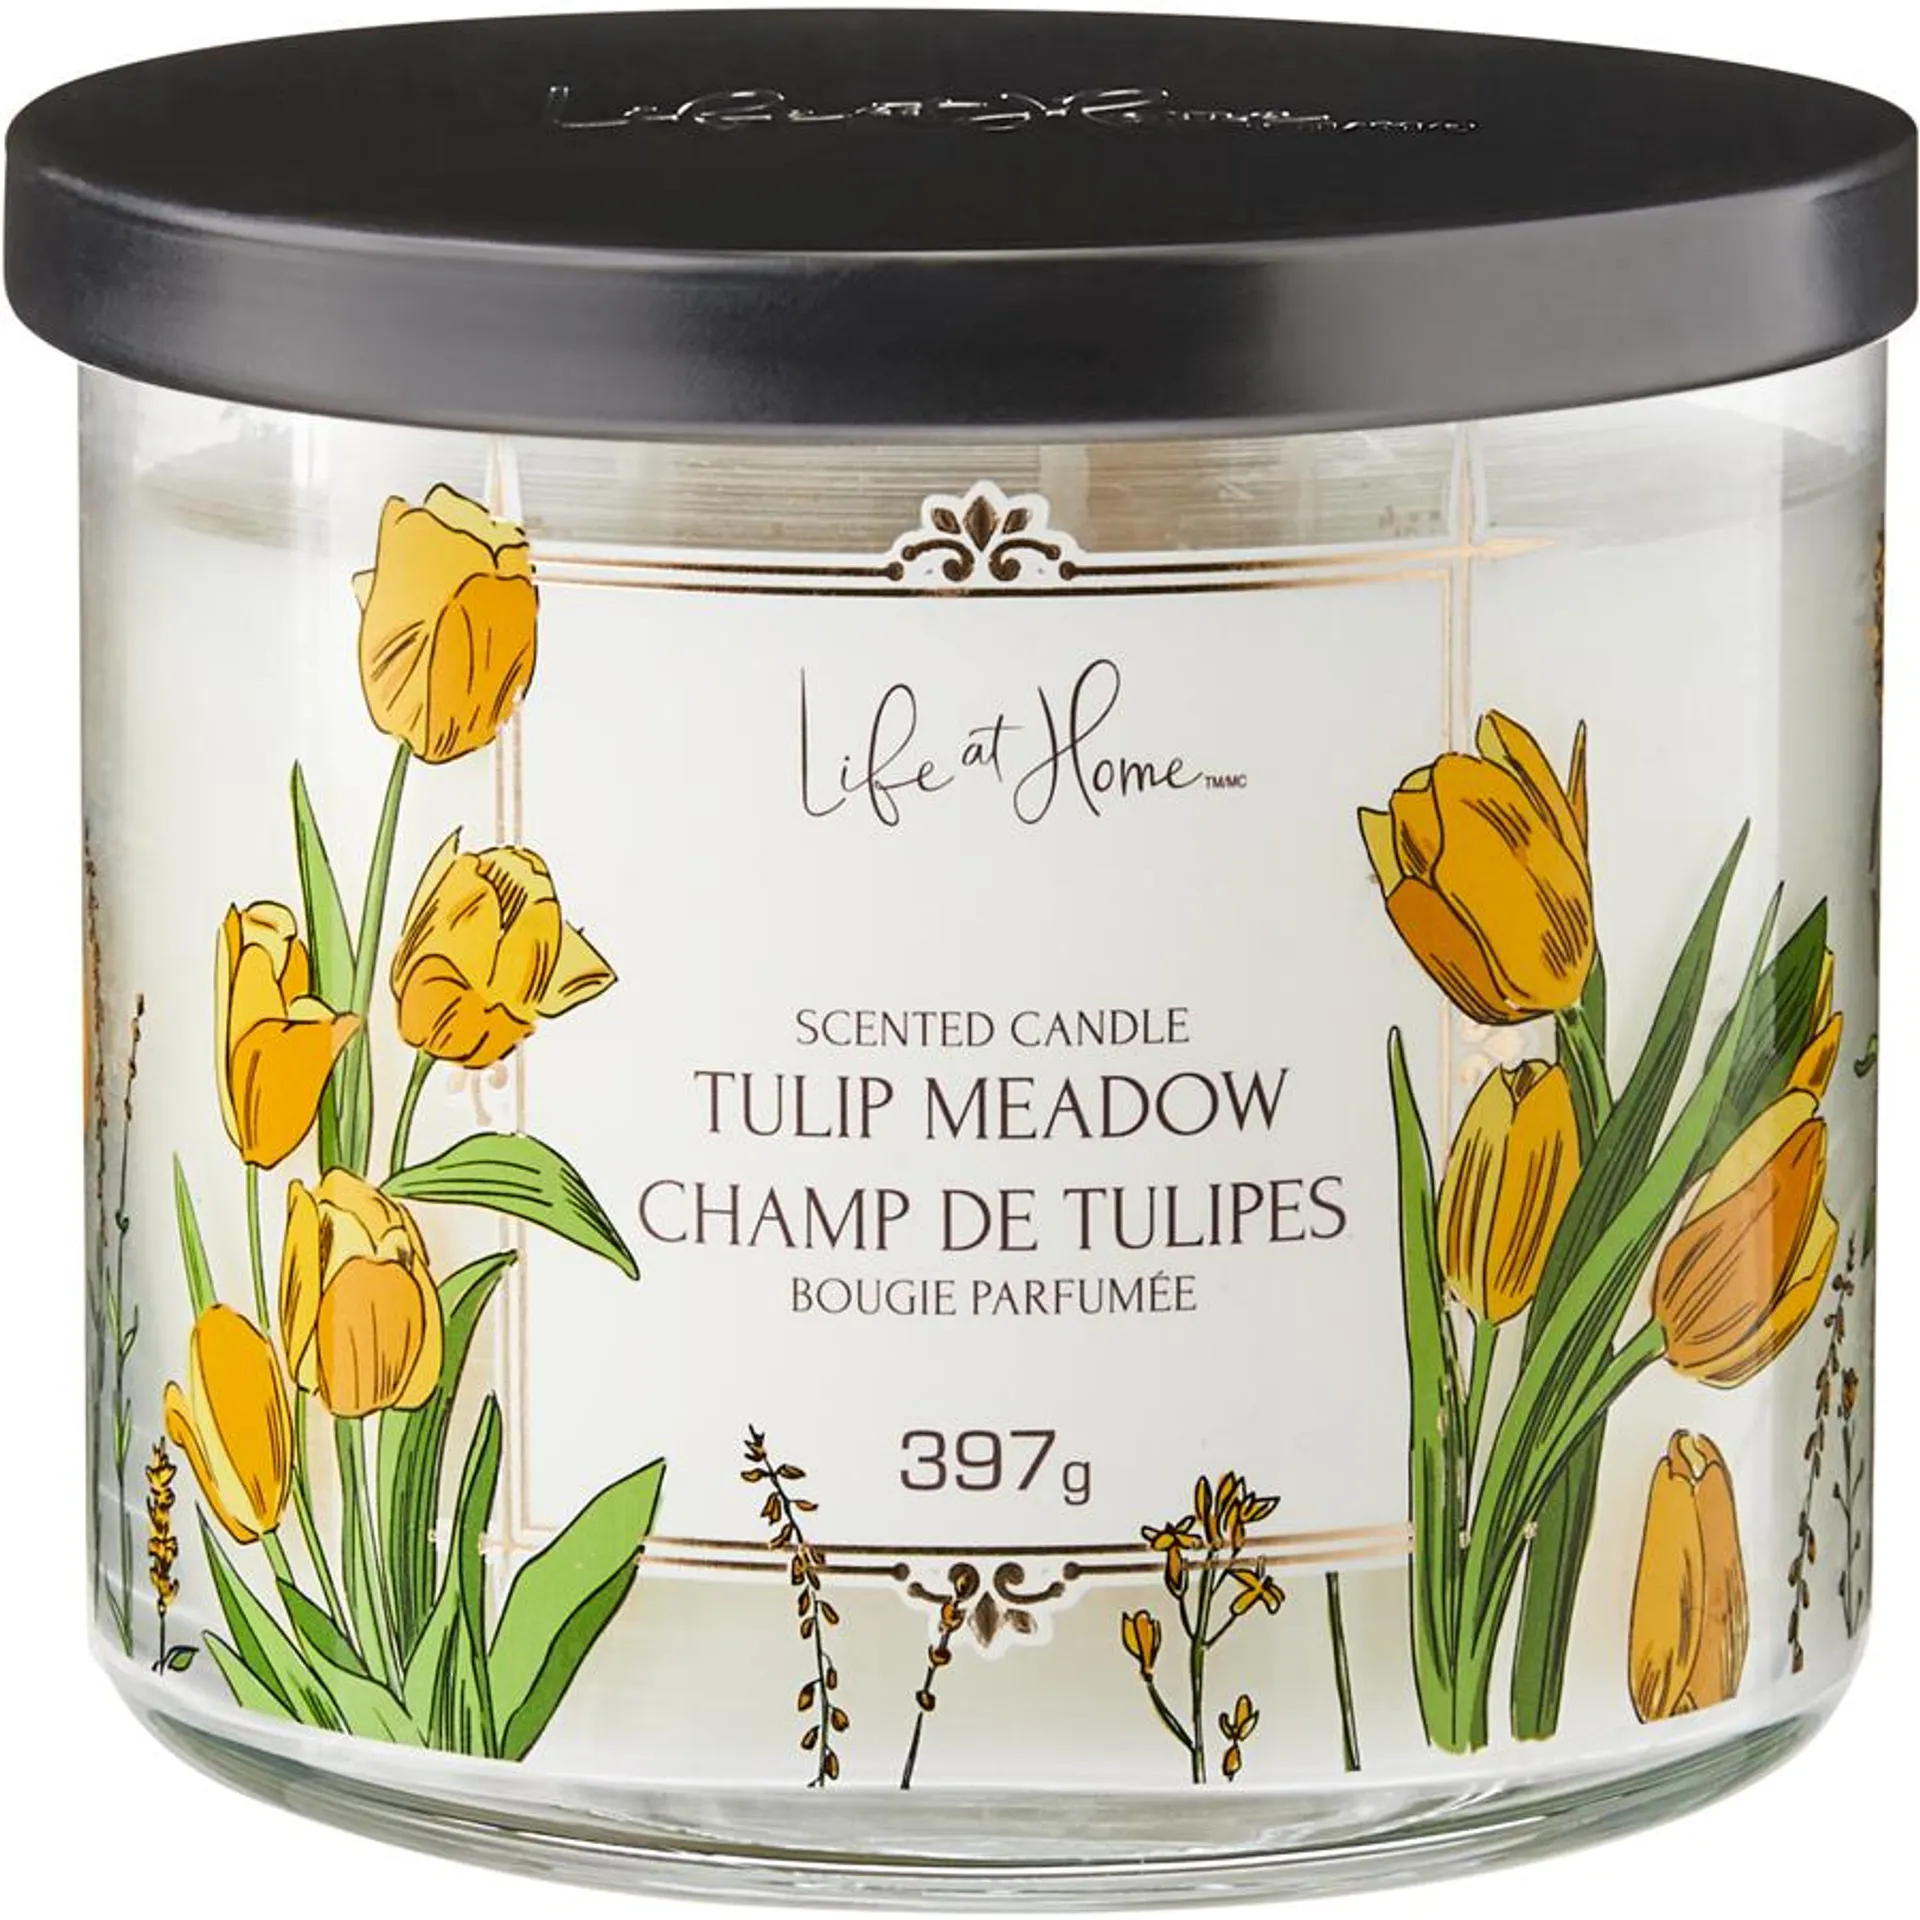 3-Wick Scented Candle, Tulip Meadow - 14oz